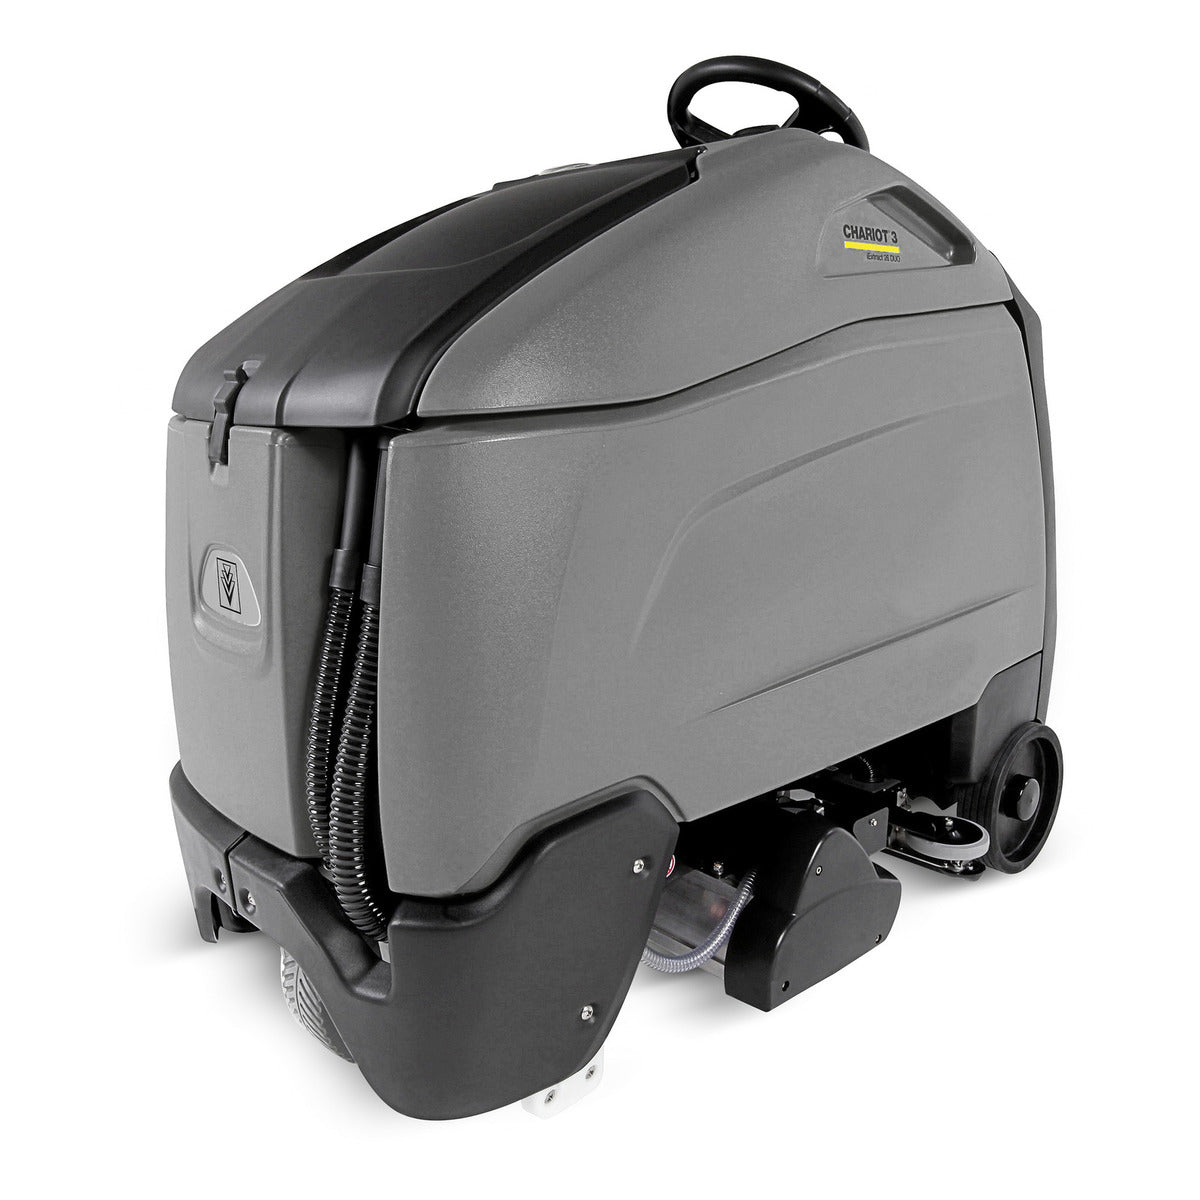 Karcher Chariot 3 iExtract 26 Duo, 25 Gallon, 26", Lithium, Ride On, Carpet Extractor